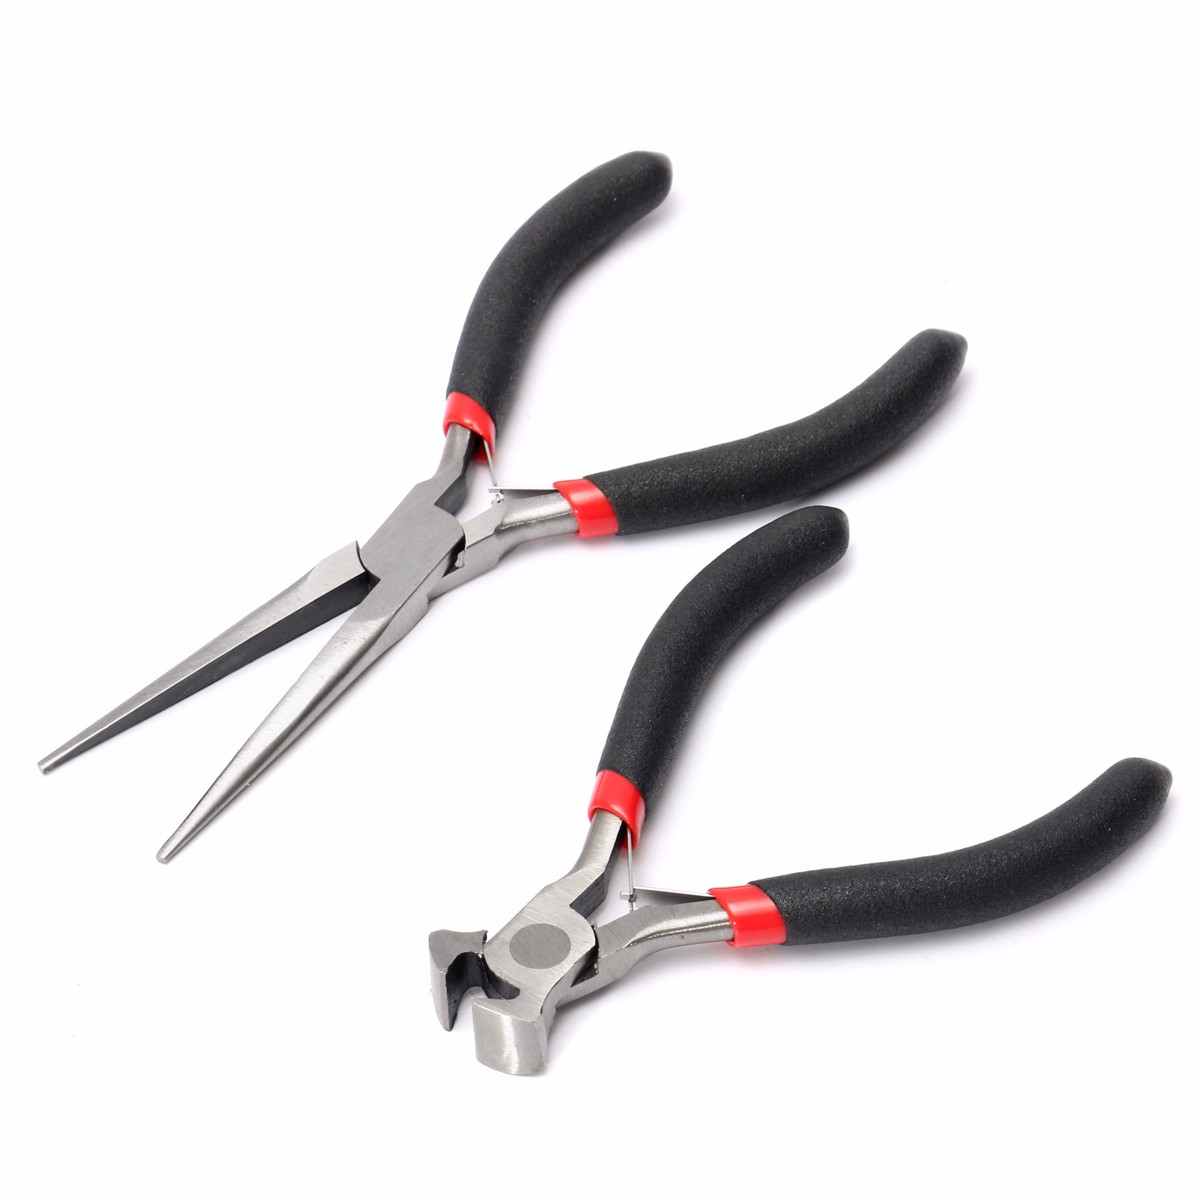 Jewellery-Mini-Pliers-Cutter-Round-Bent-Nose-Beading-Making-Craft-Tool-Kit-1143377